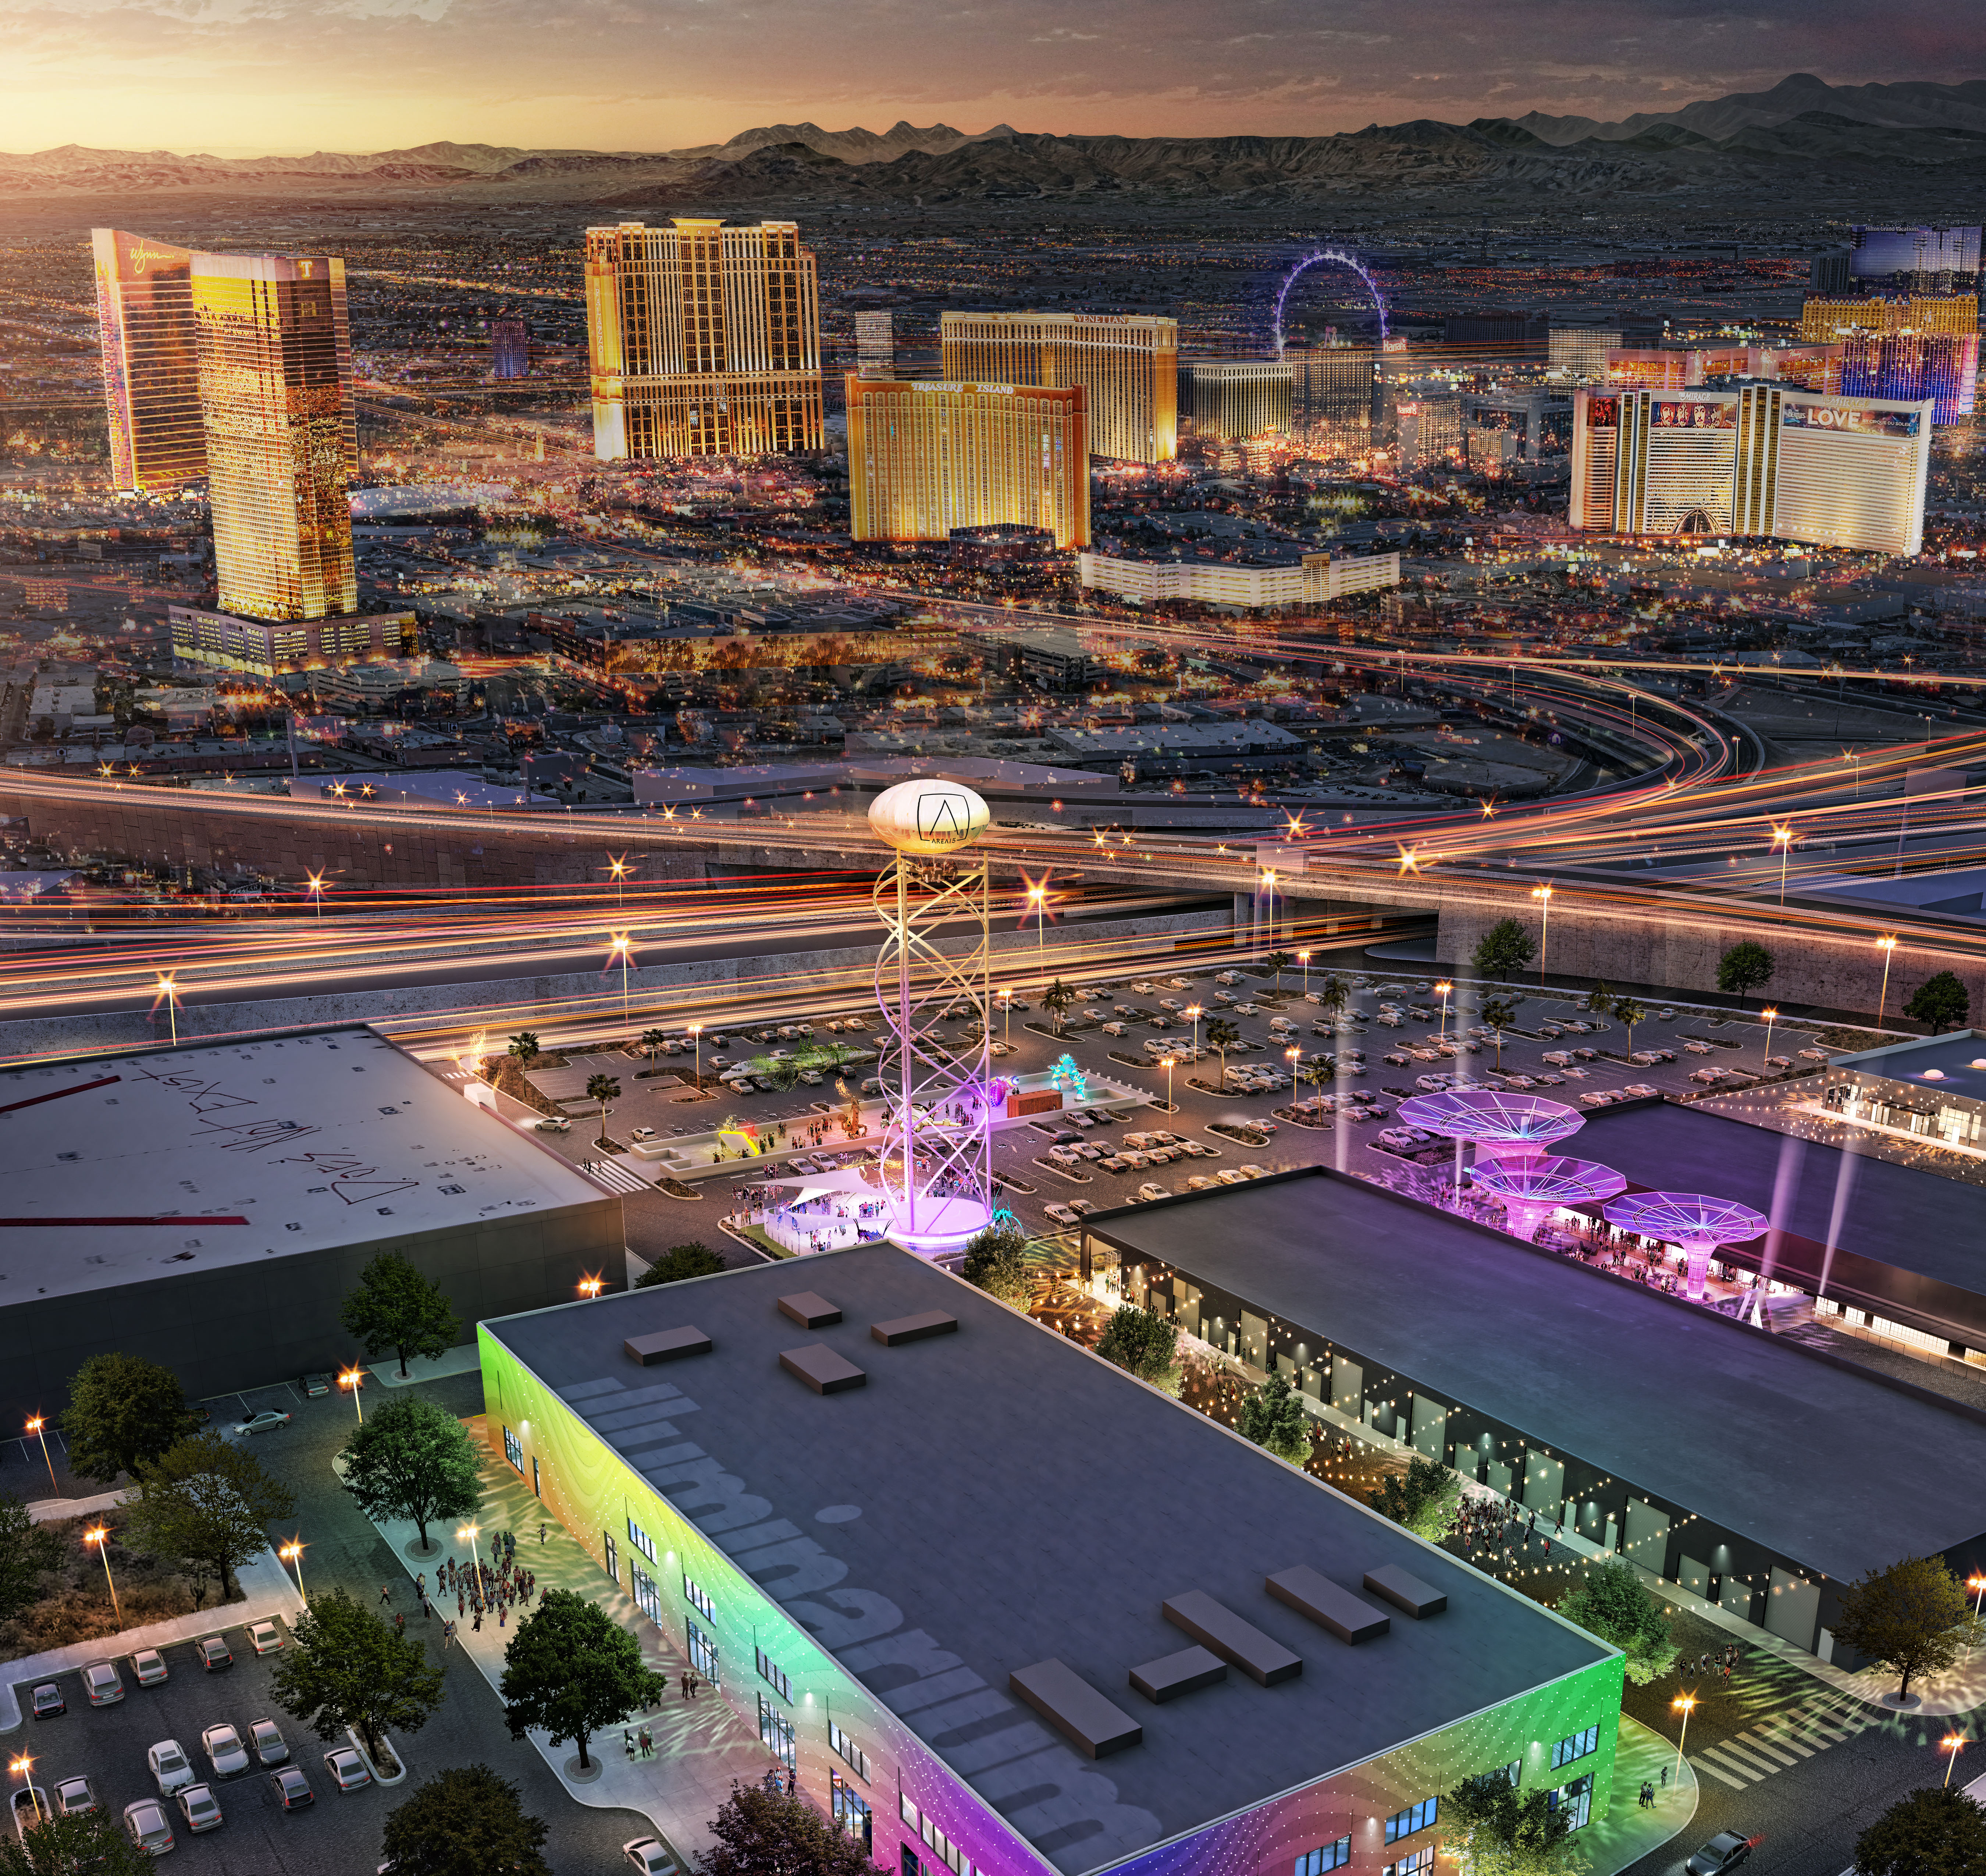 A view of an outdoor/indoor entertainment complex with the skyline of Las Vegas in the background